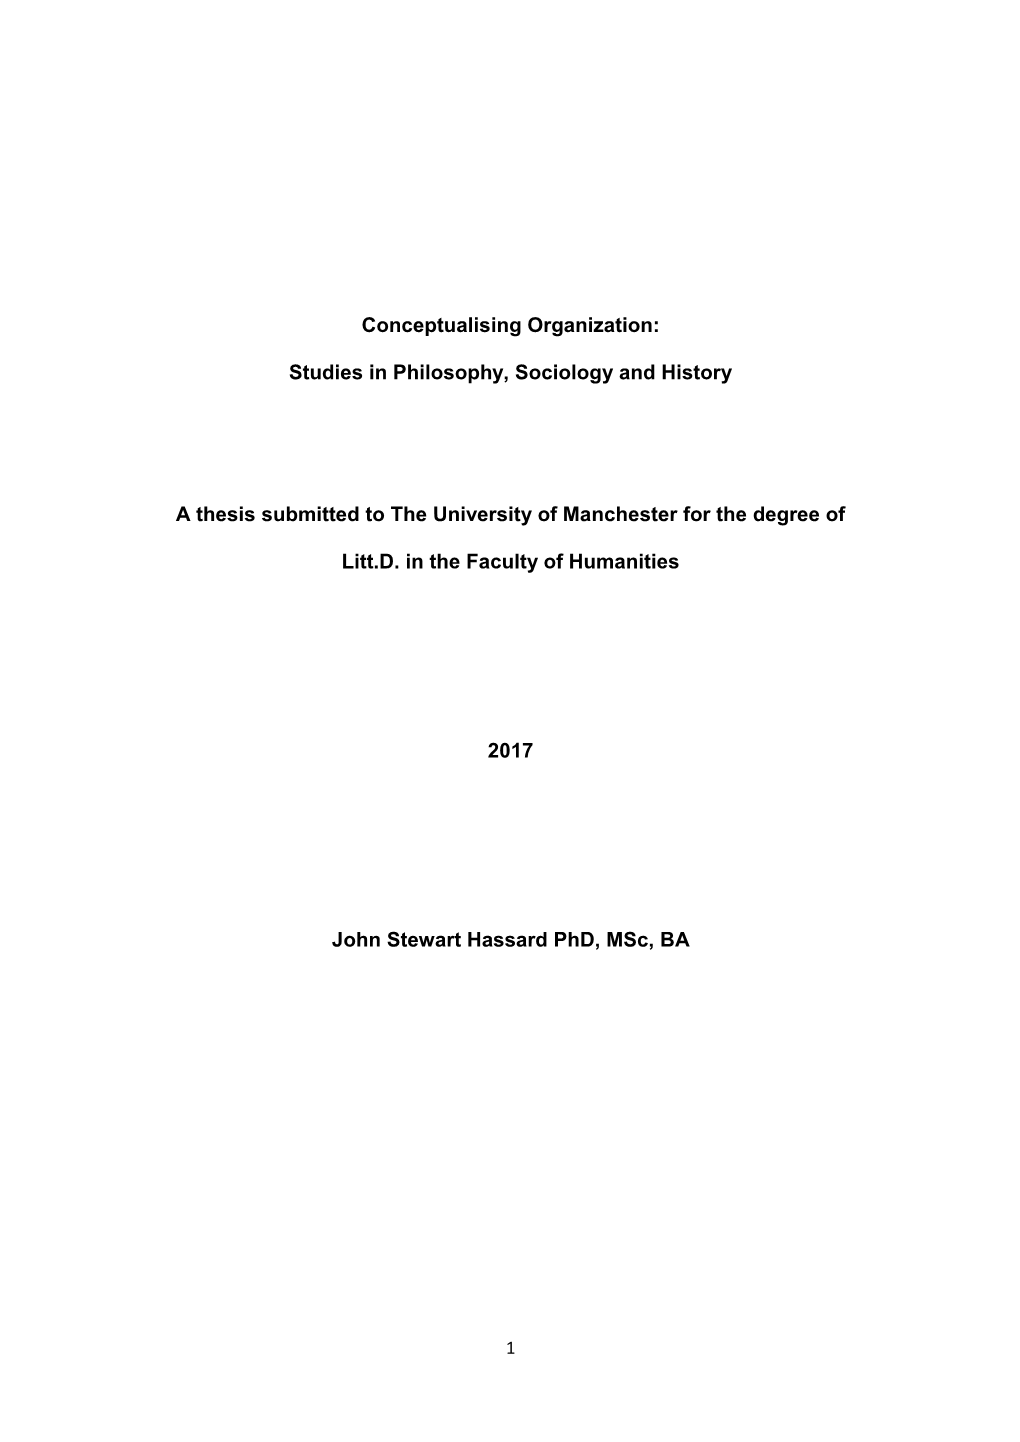 Studies in Philosophy, Sociology and History a Thesis Submitted to The